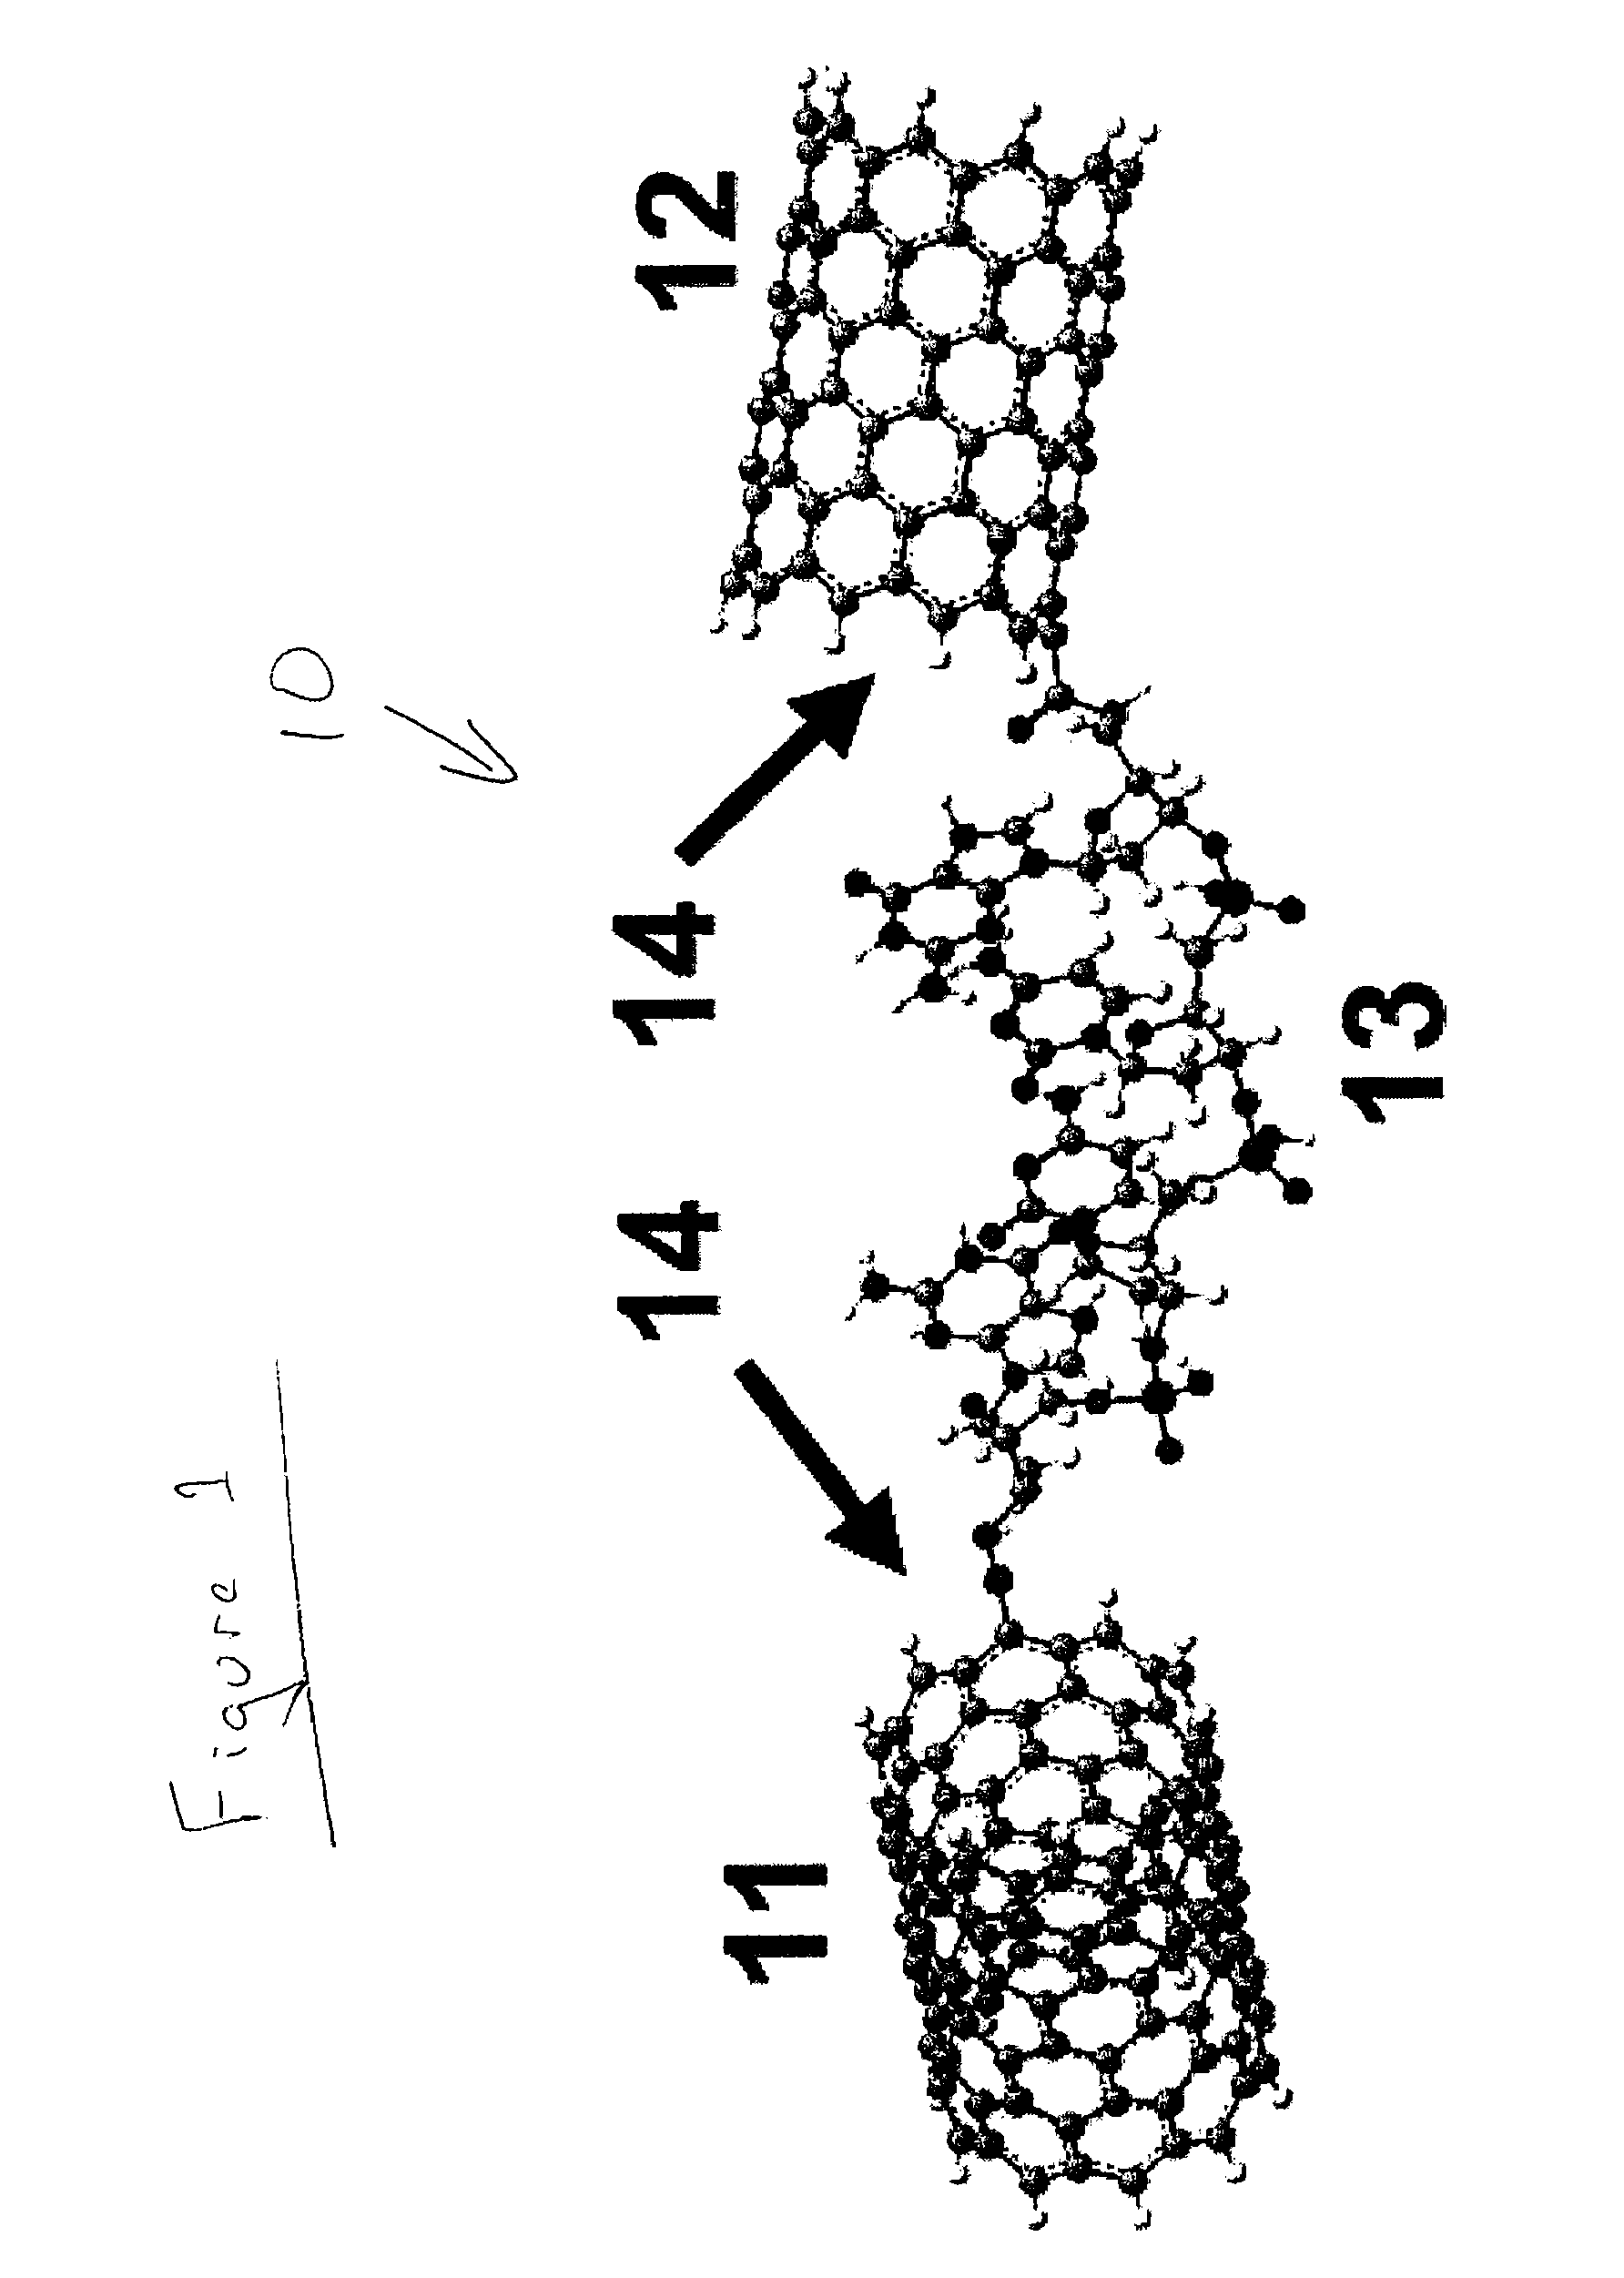 Molecular resonant tunneling diode